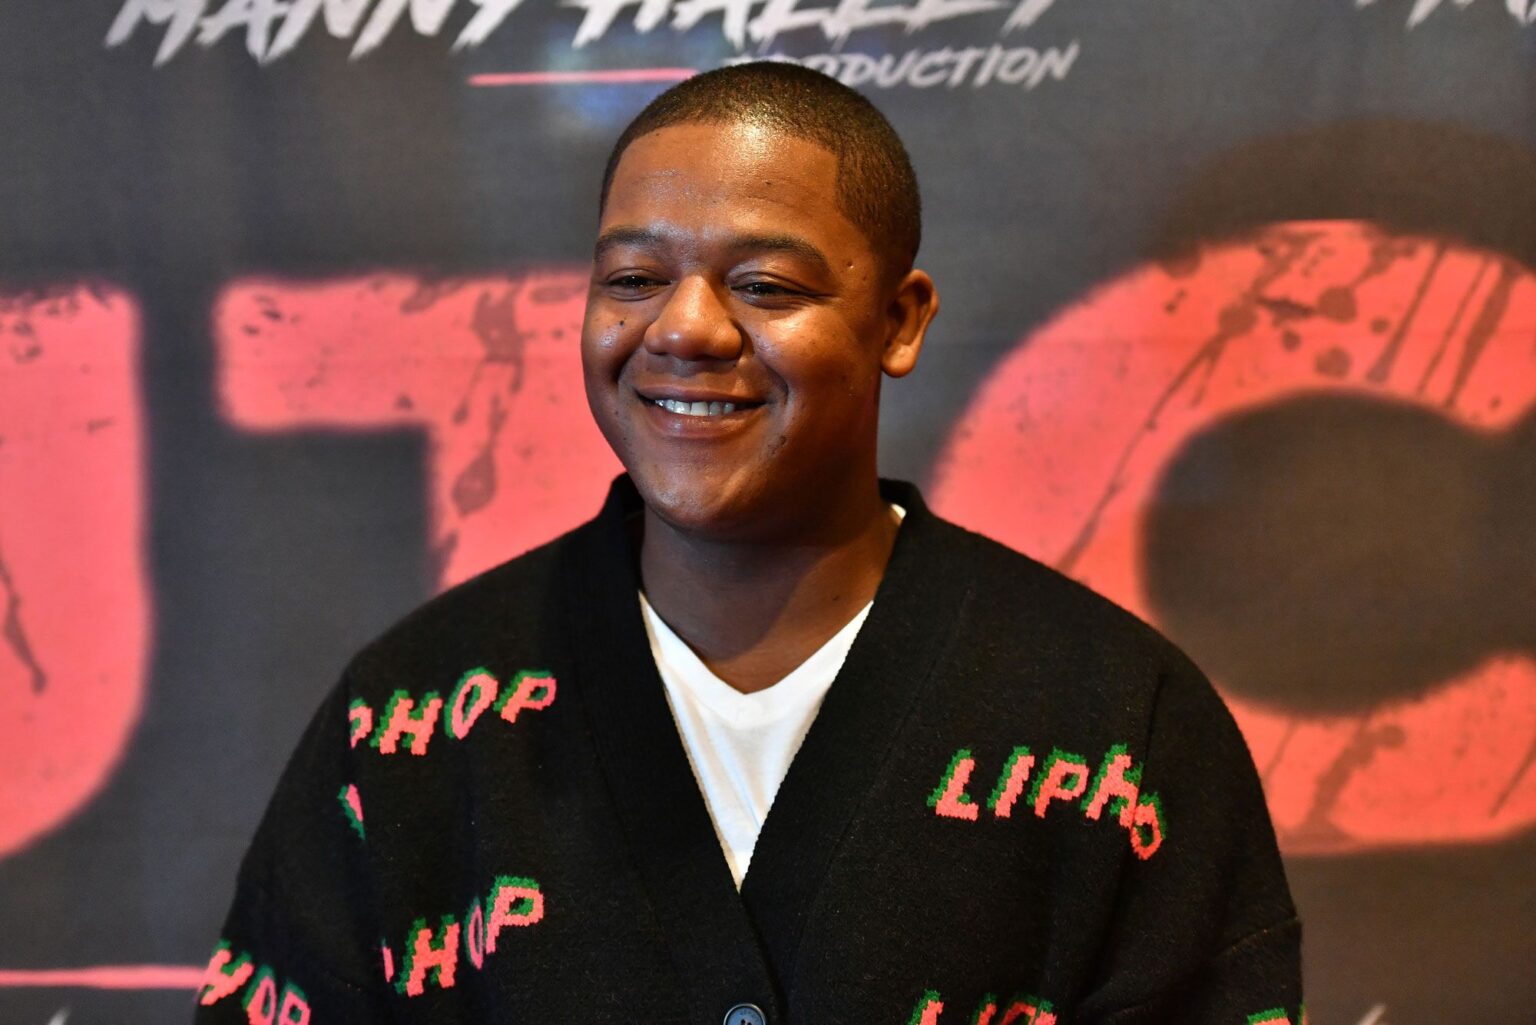 Former Disney star Kyle Massey has been charged with pedophilia. If only Cory from 'That's So Raven' could've seen into the future like his sister.